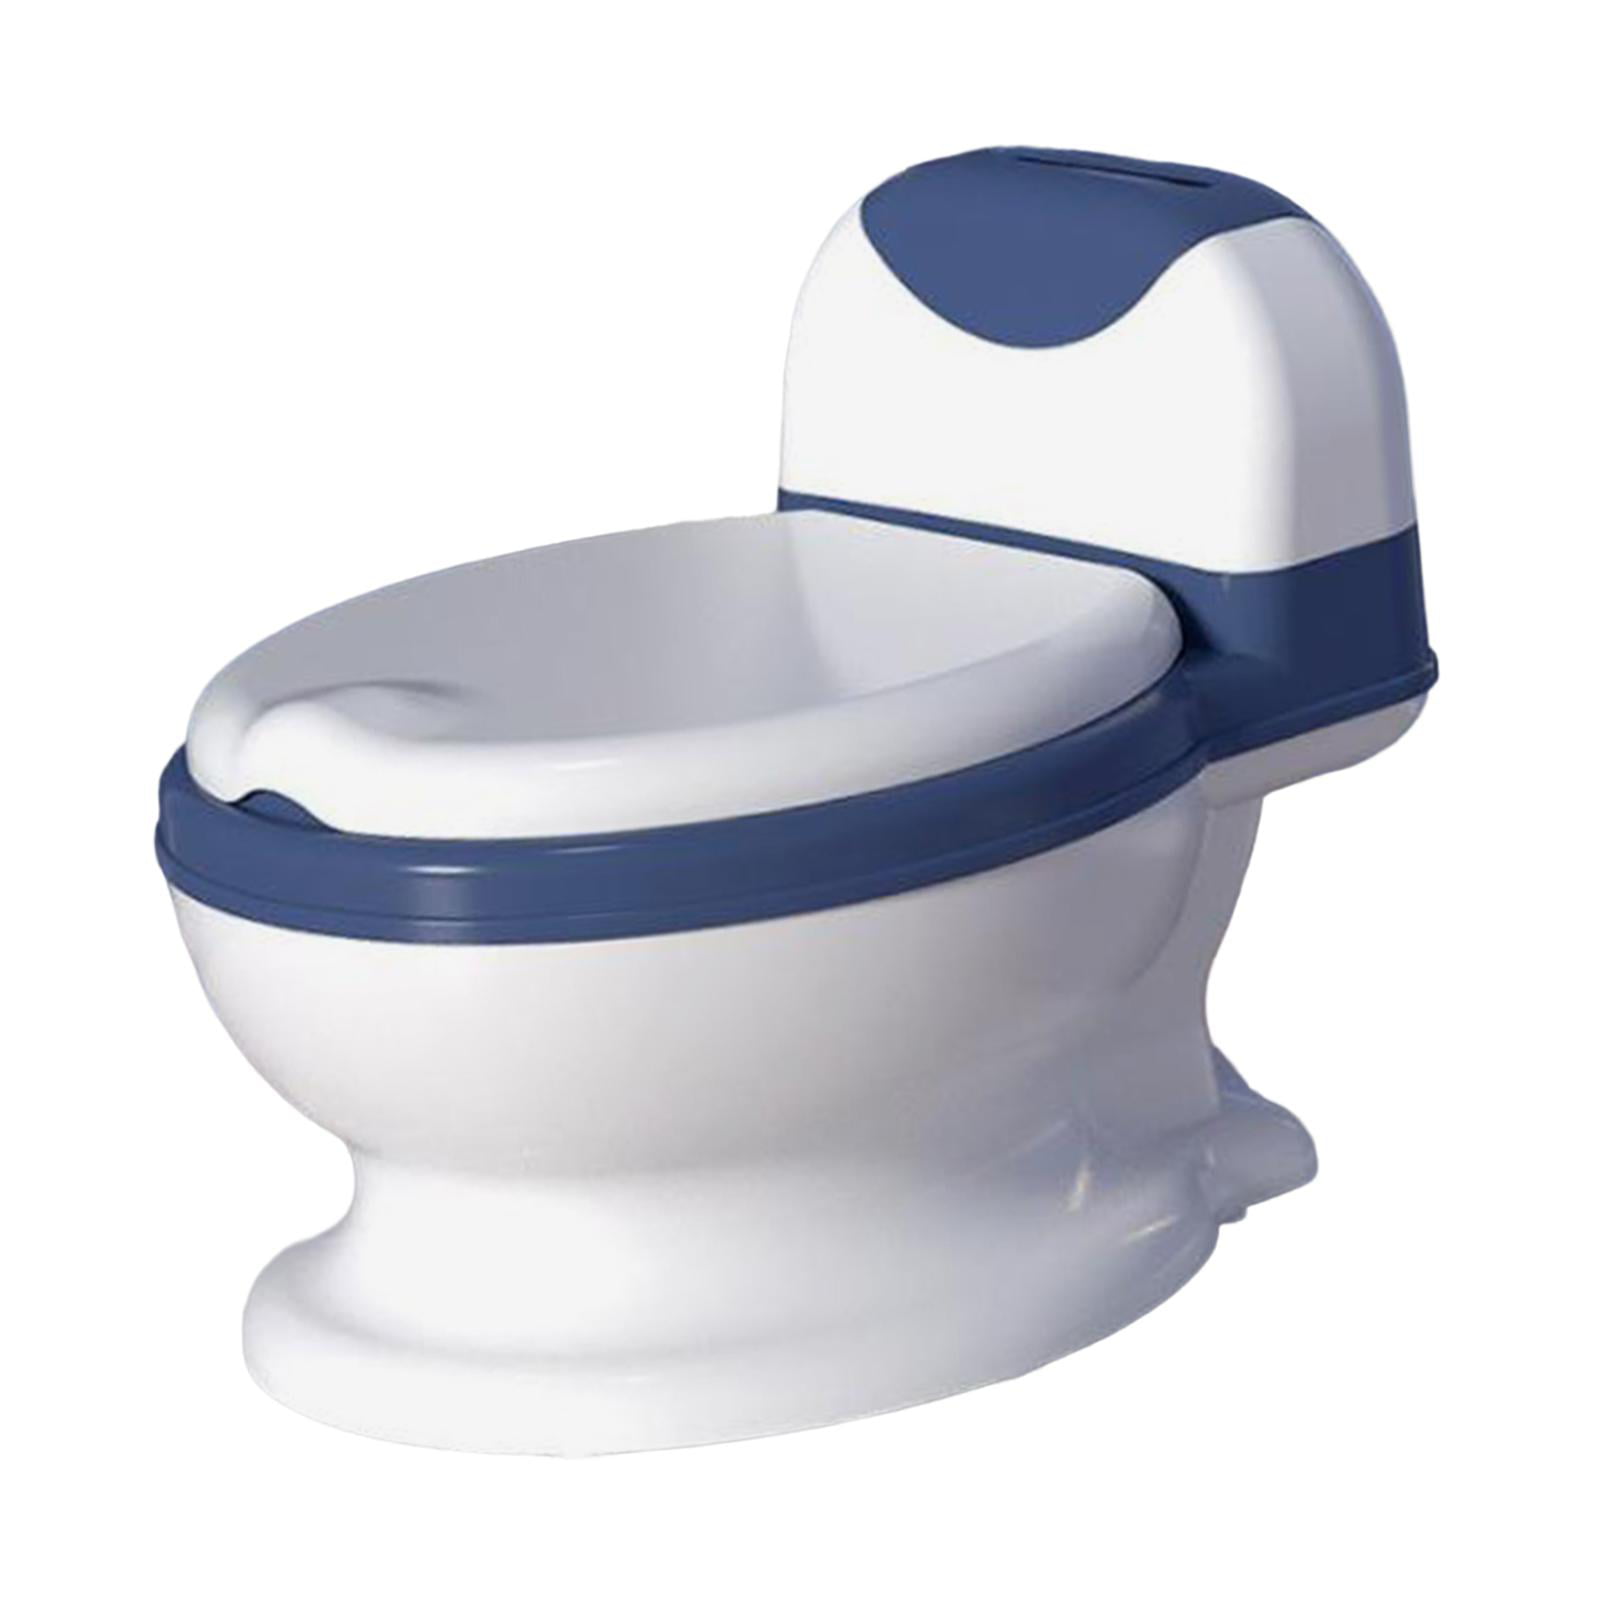 Toilet Training Potty Infants Toilet Easy Clean Compact Size Kids Potty Chair for Indoor Outdoor Ages 0-8 Kids Girls Boys Infants Blue - Walmart.com